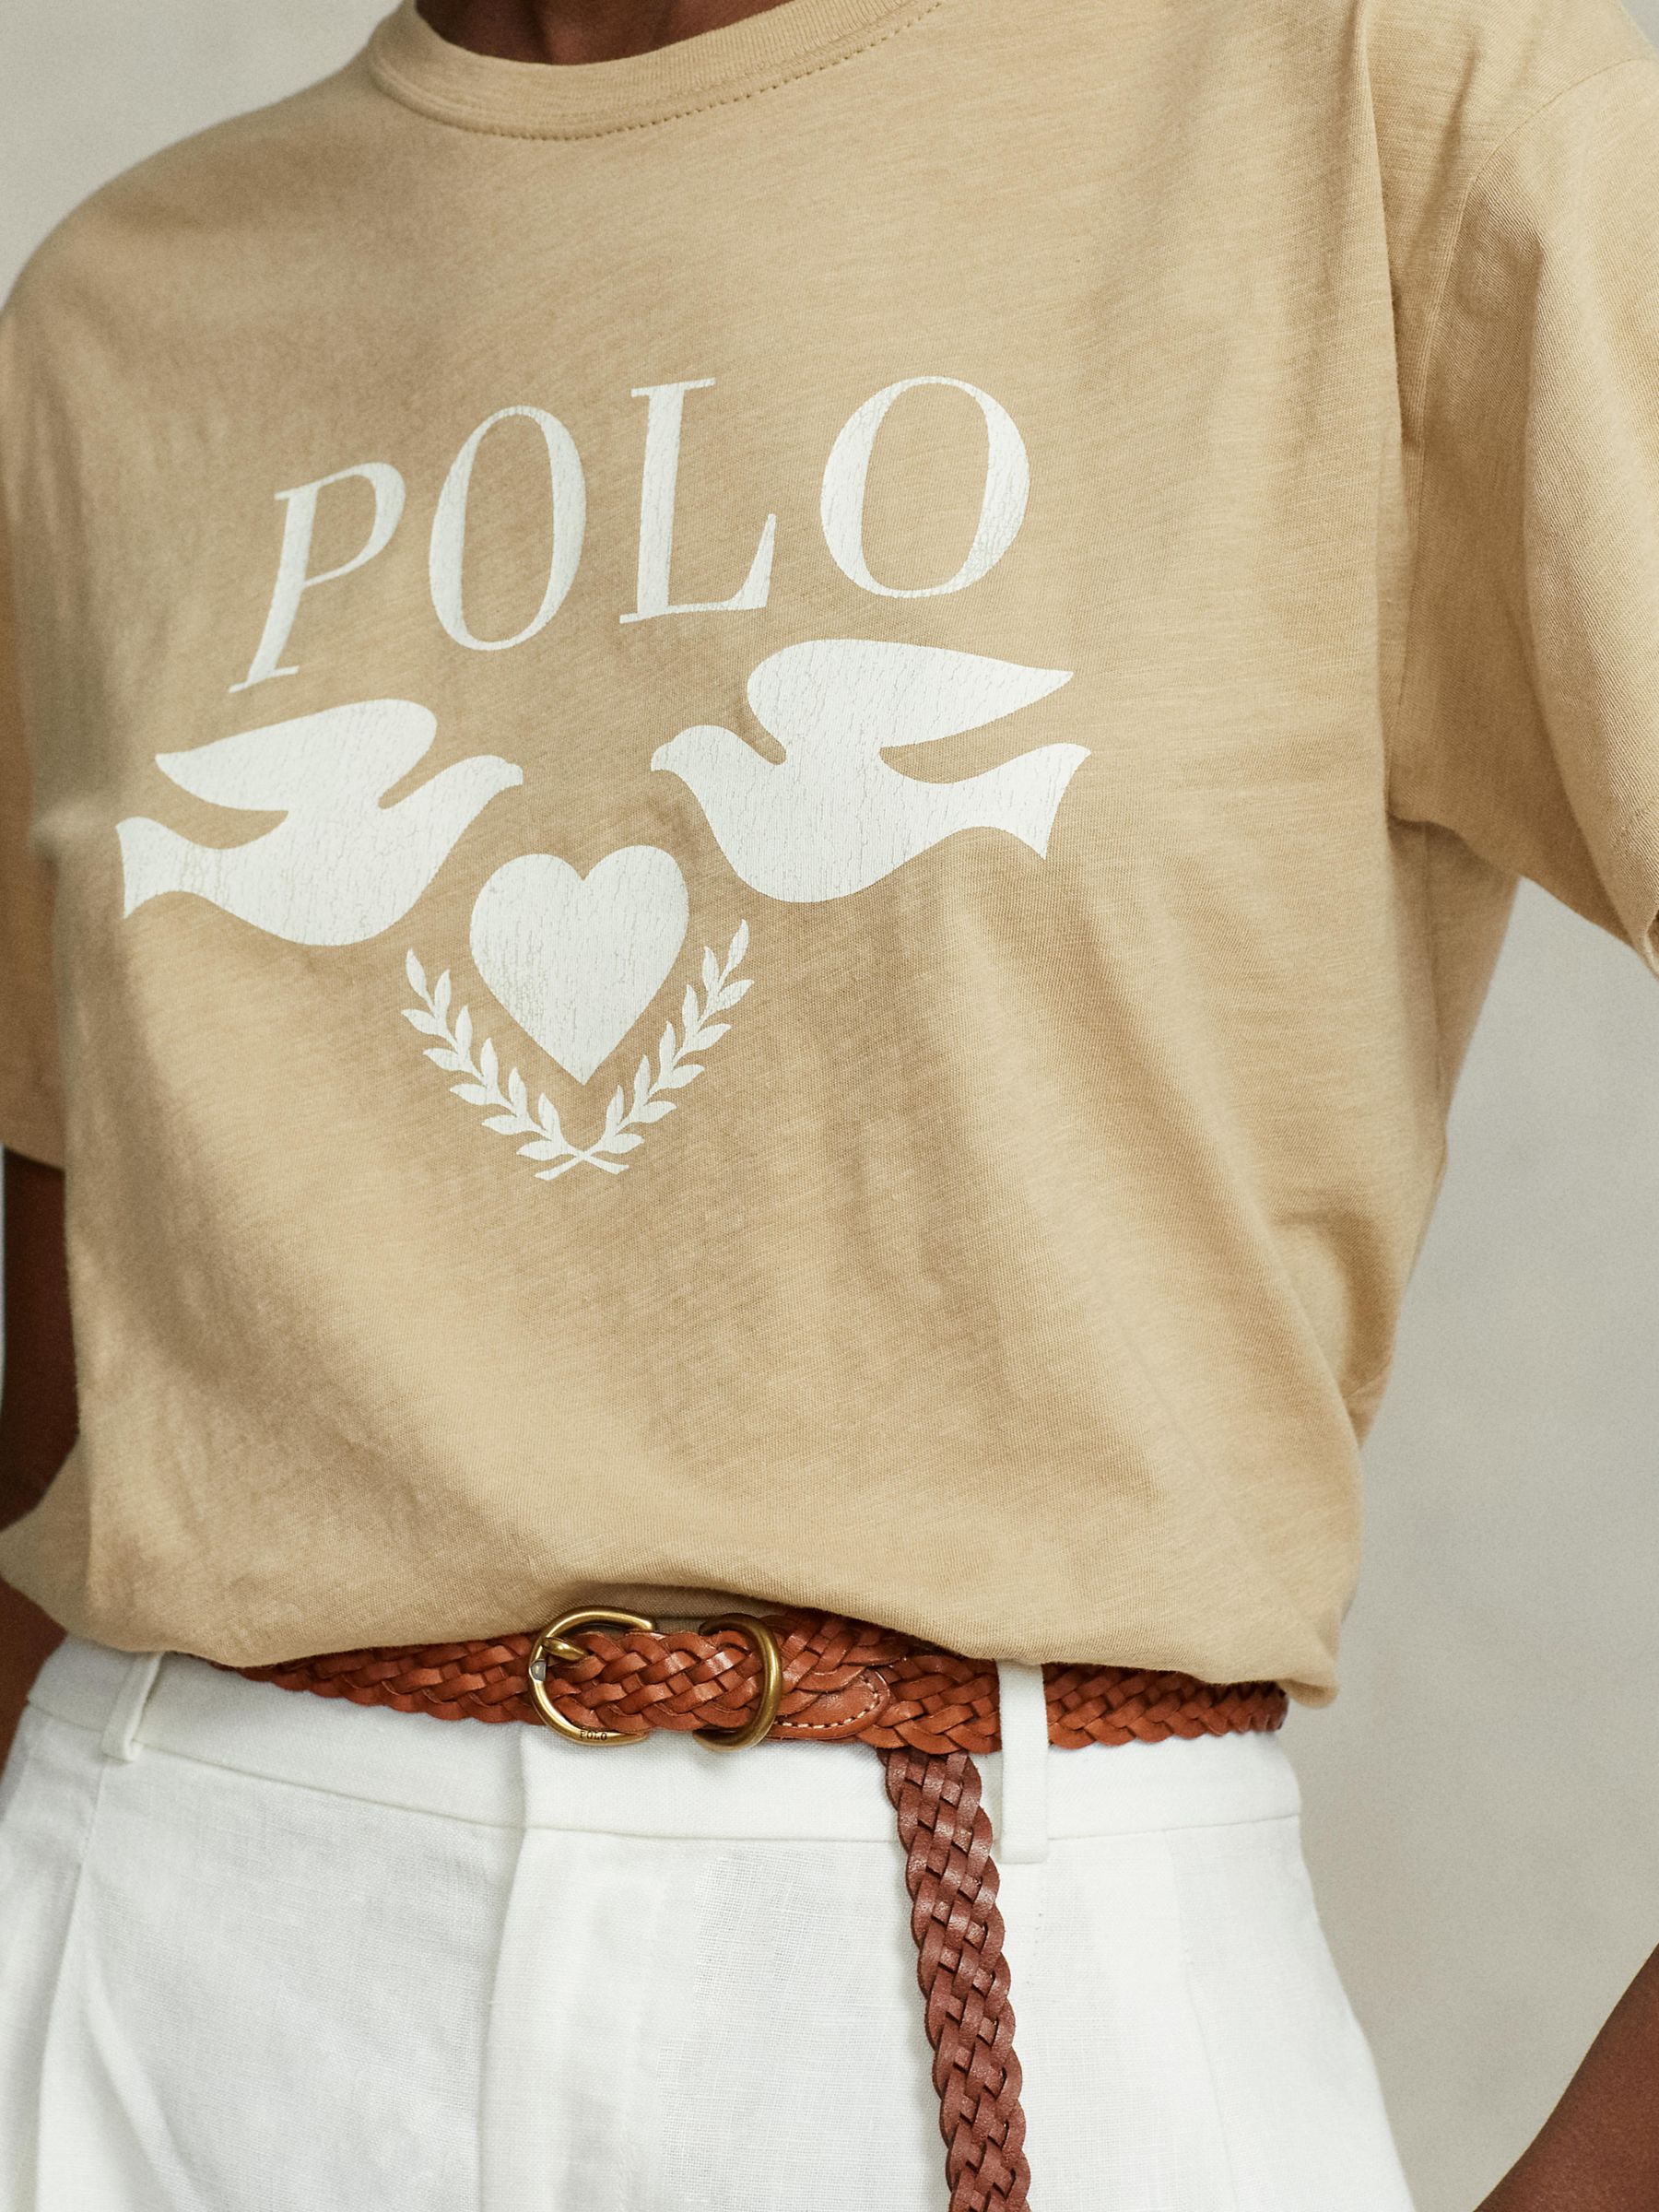 Ralph Lauren aims to boost appeal with younger consumers